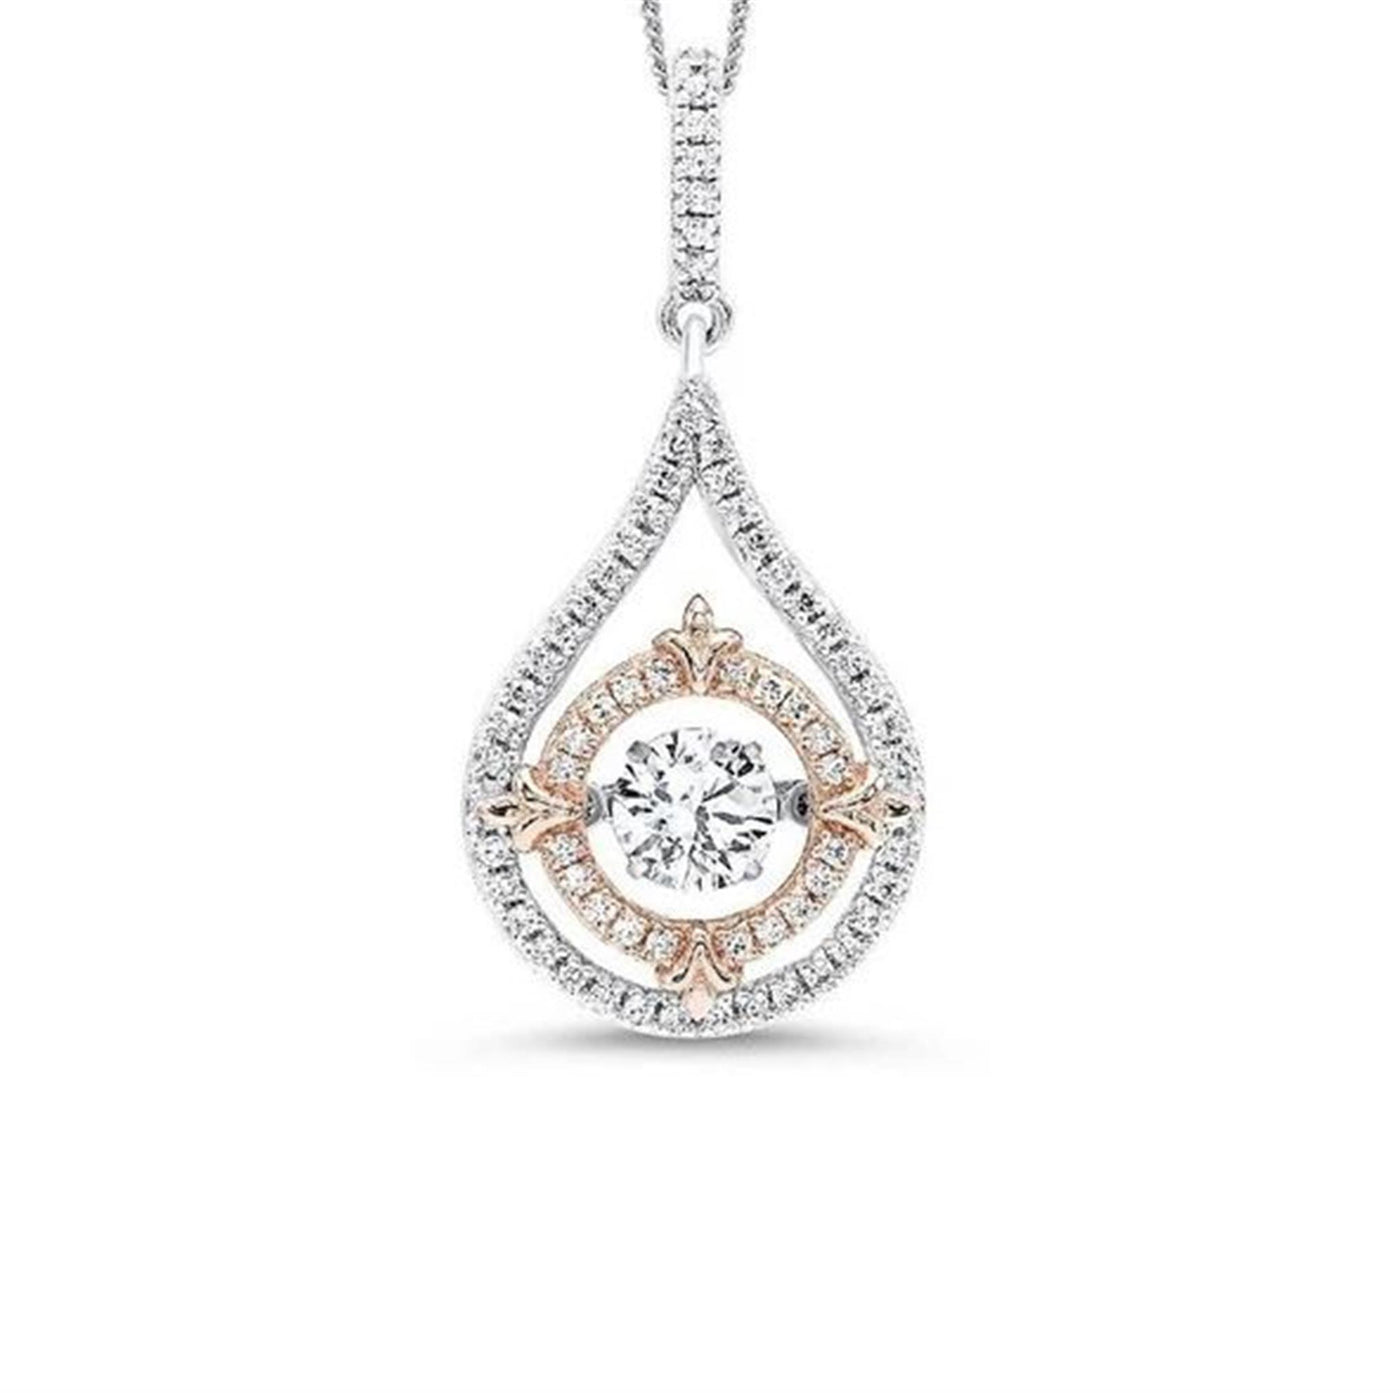 Sterling Silver 0ctw Rhythm of Love Style Cubic Zirconias Necklace